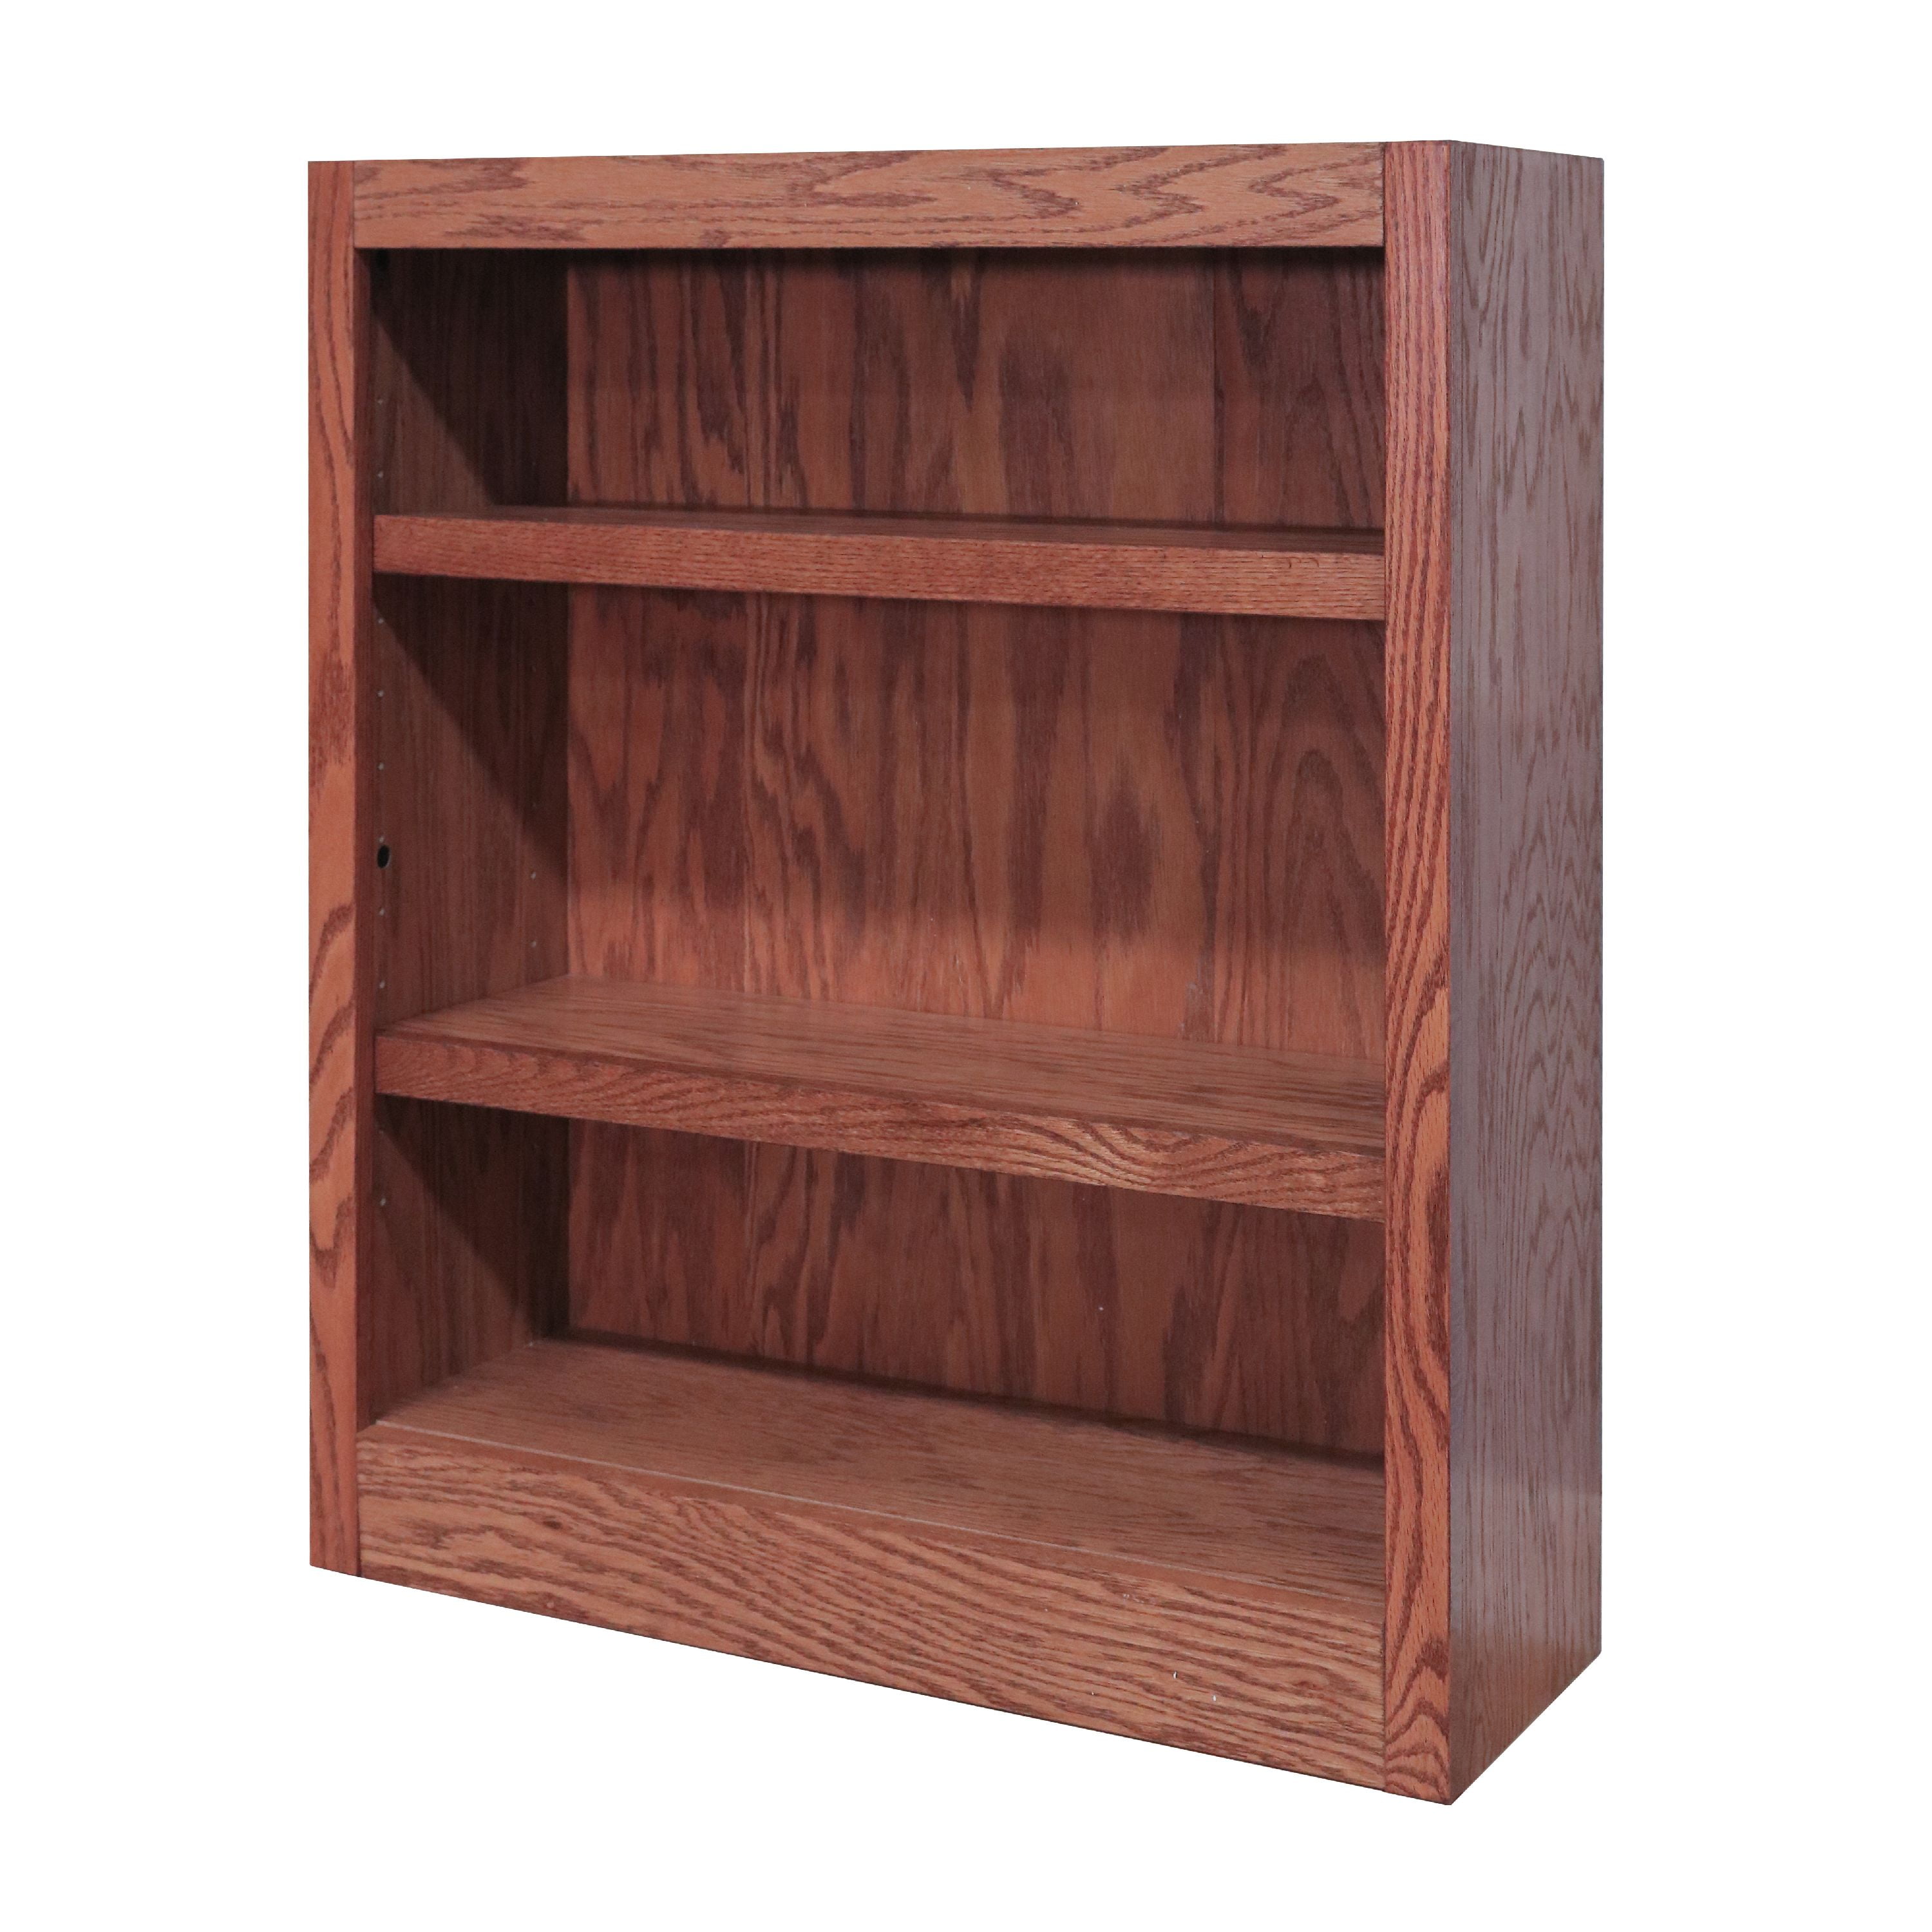 Concepts In Wood 3 Shelf Bookcase, 36 Inch Tall Bookcase With Doors